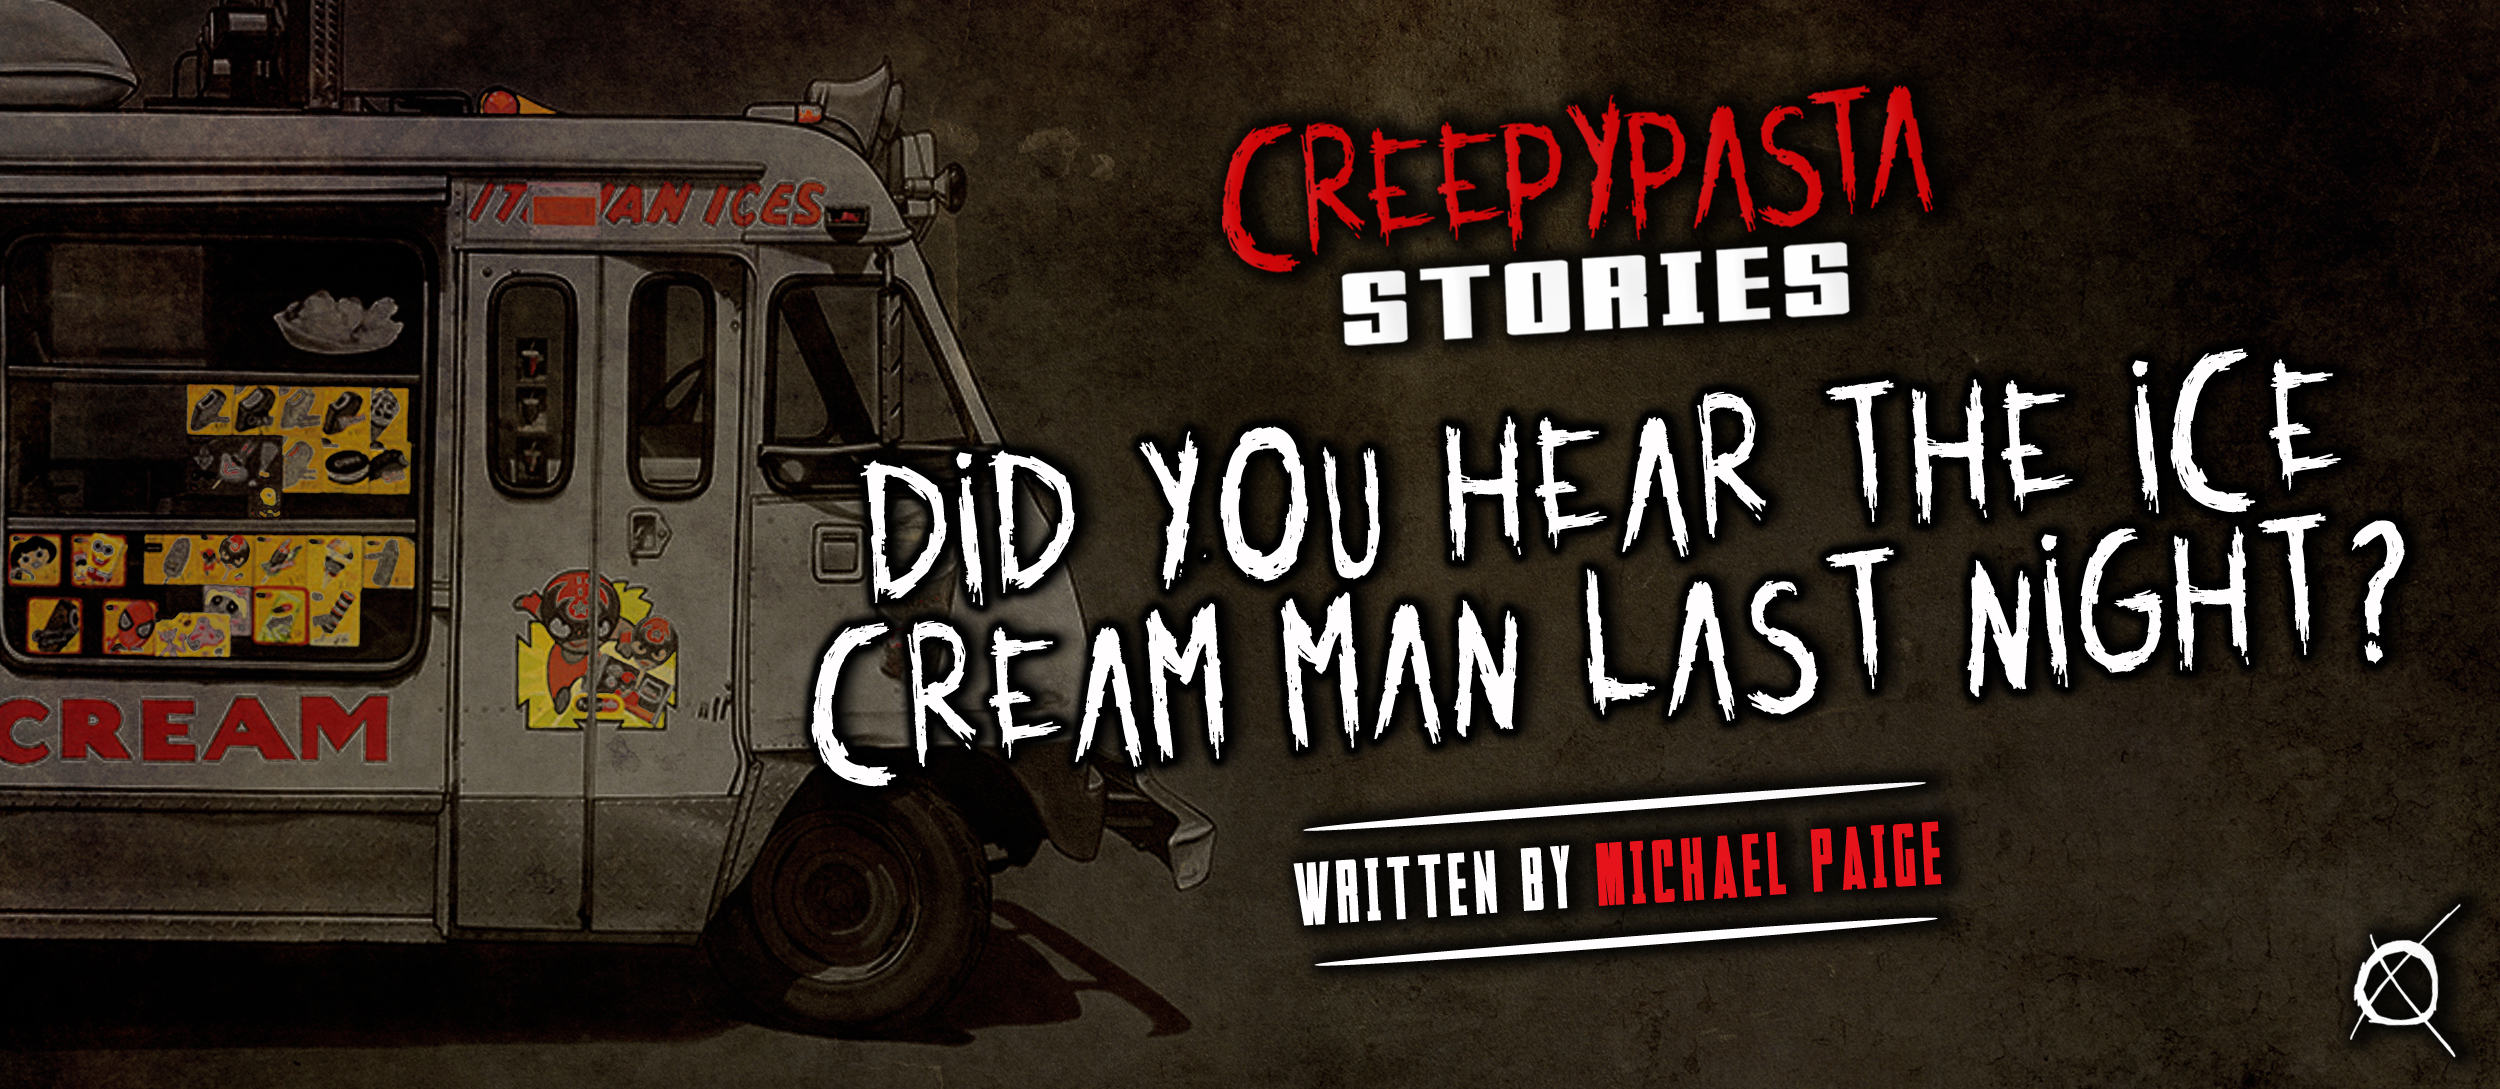 Creepypasta Stories Scary Stories And Original Horror Fiction Did You Hear The Ice Cream Man Last Night